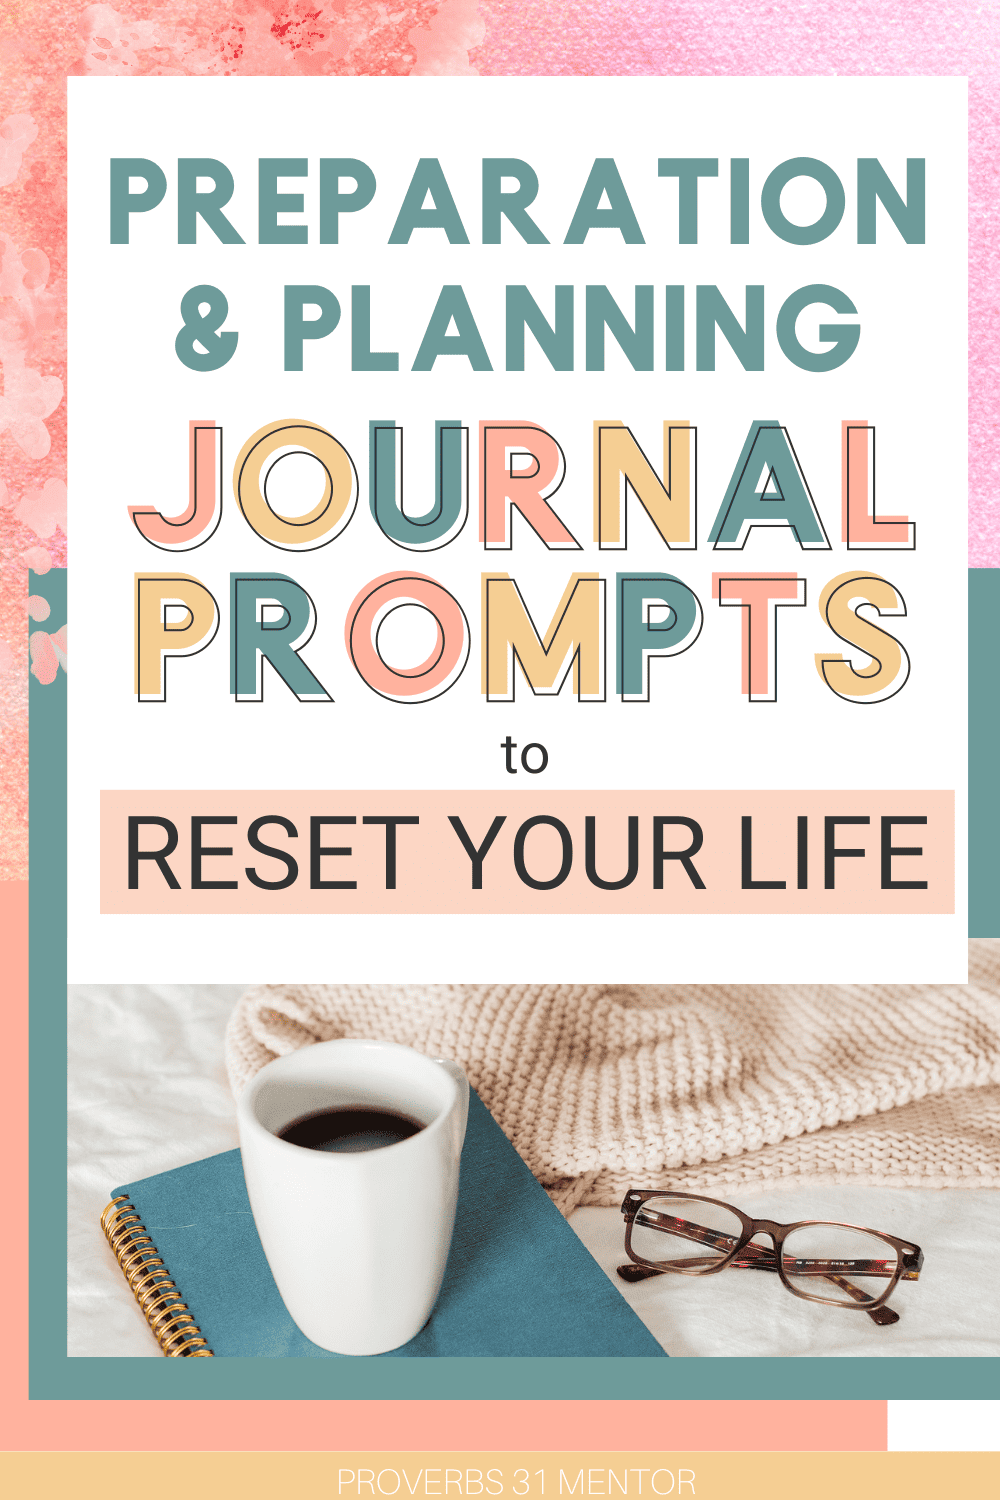 Title- Preparation and planning journal prompts to reset your life Picture- aqua notebook, coffee cup, and glasses